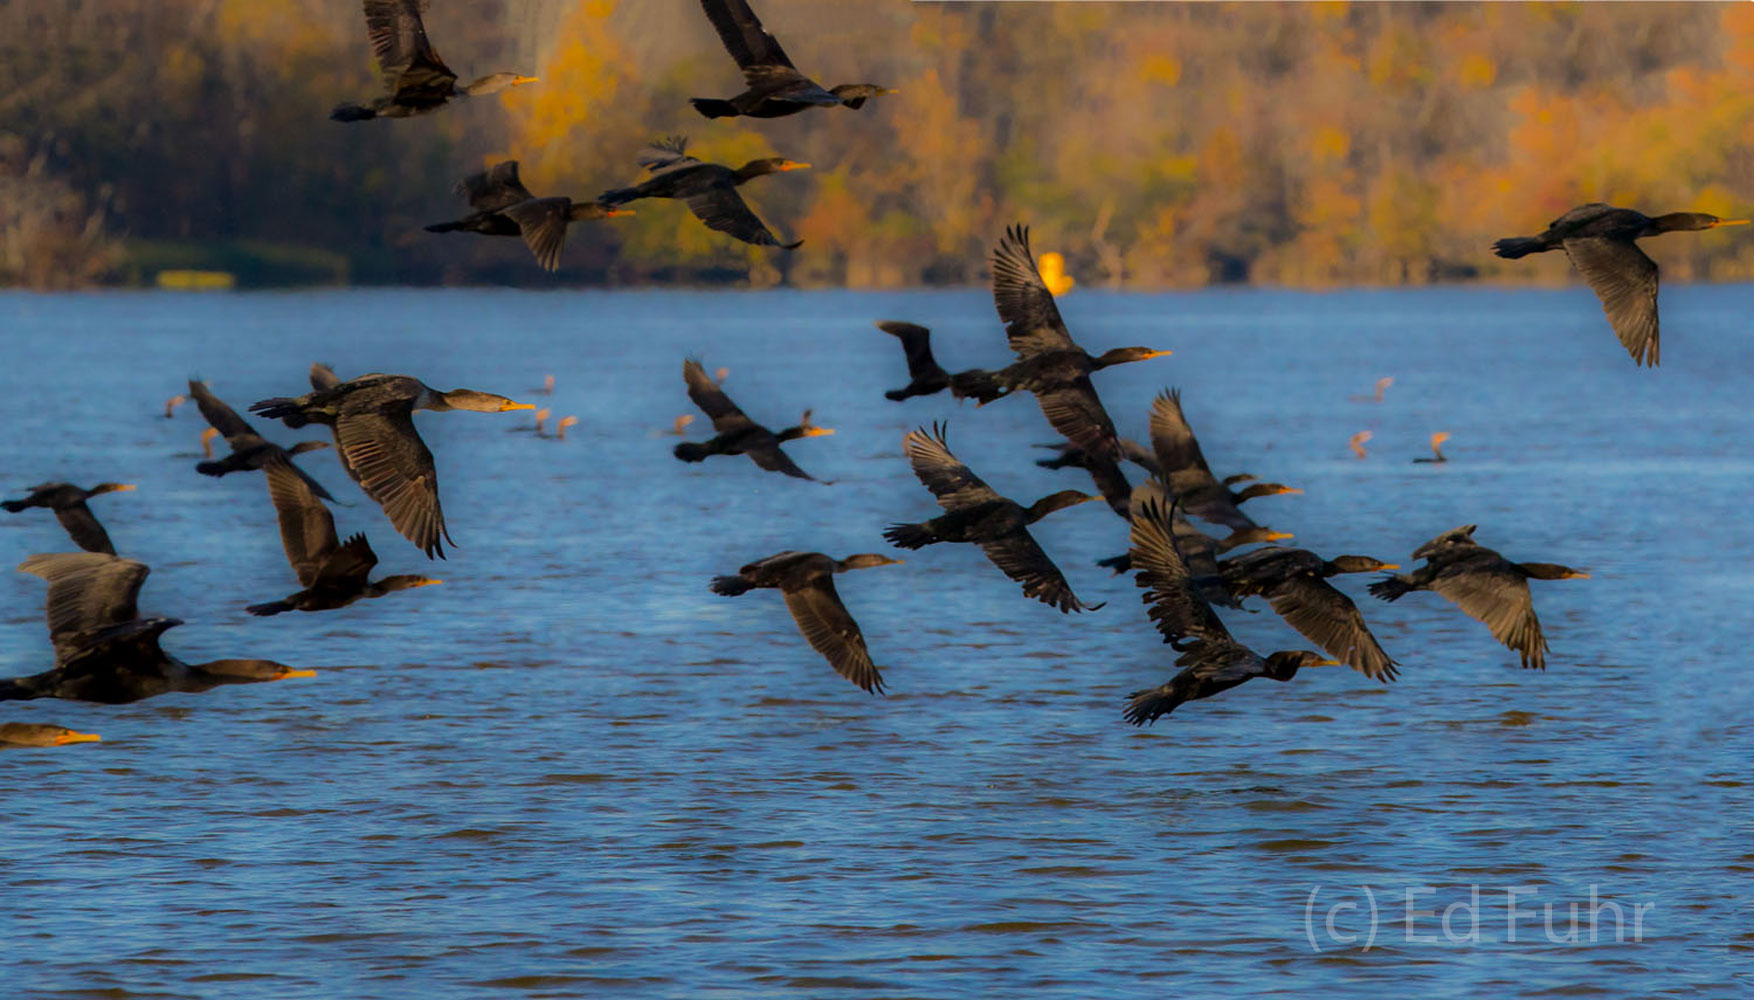 Dozens of cormorants fly through the early morning light above the James River.